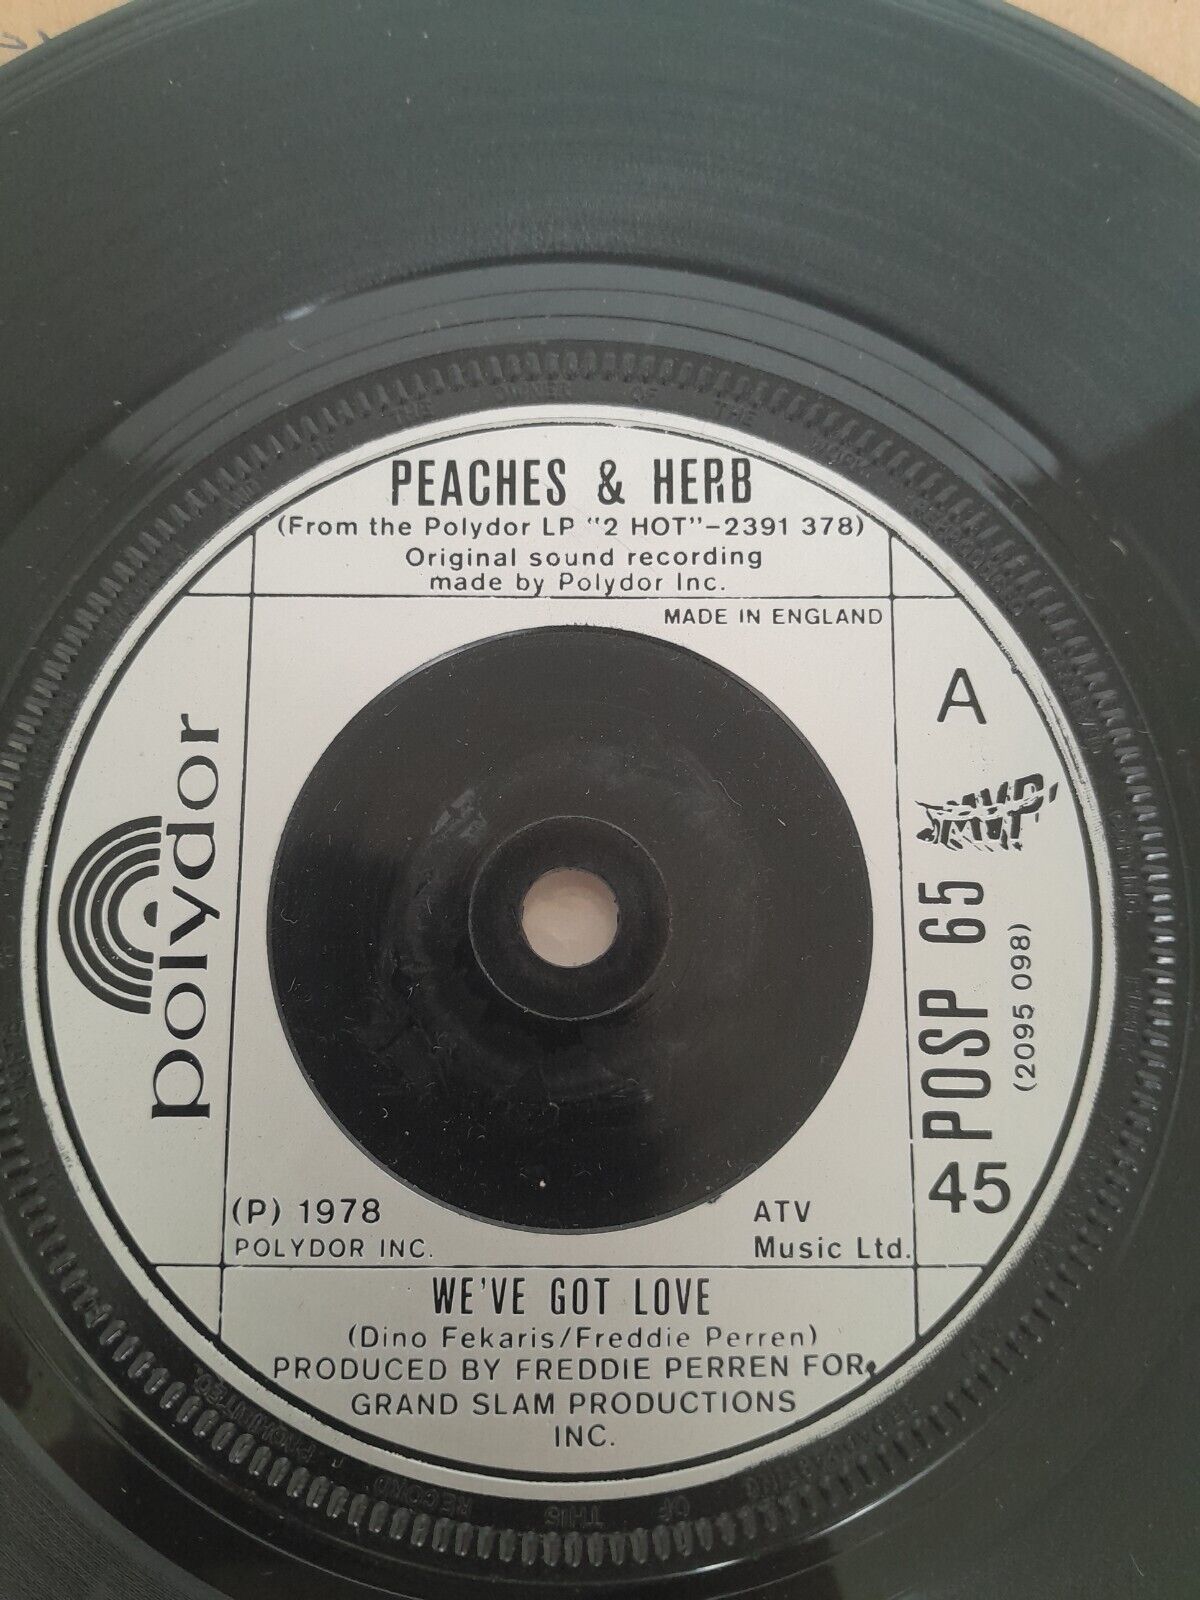 Peaches & Herb  - We've got love/Fours a traffic jam on Polydor label. Soul orig